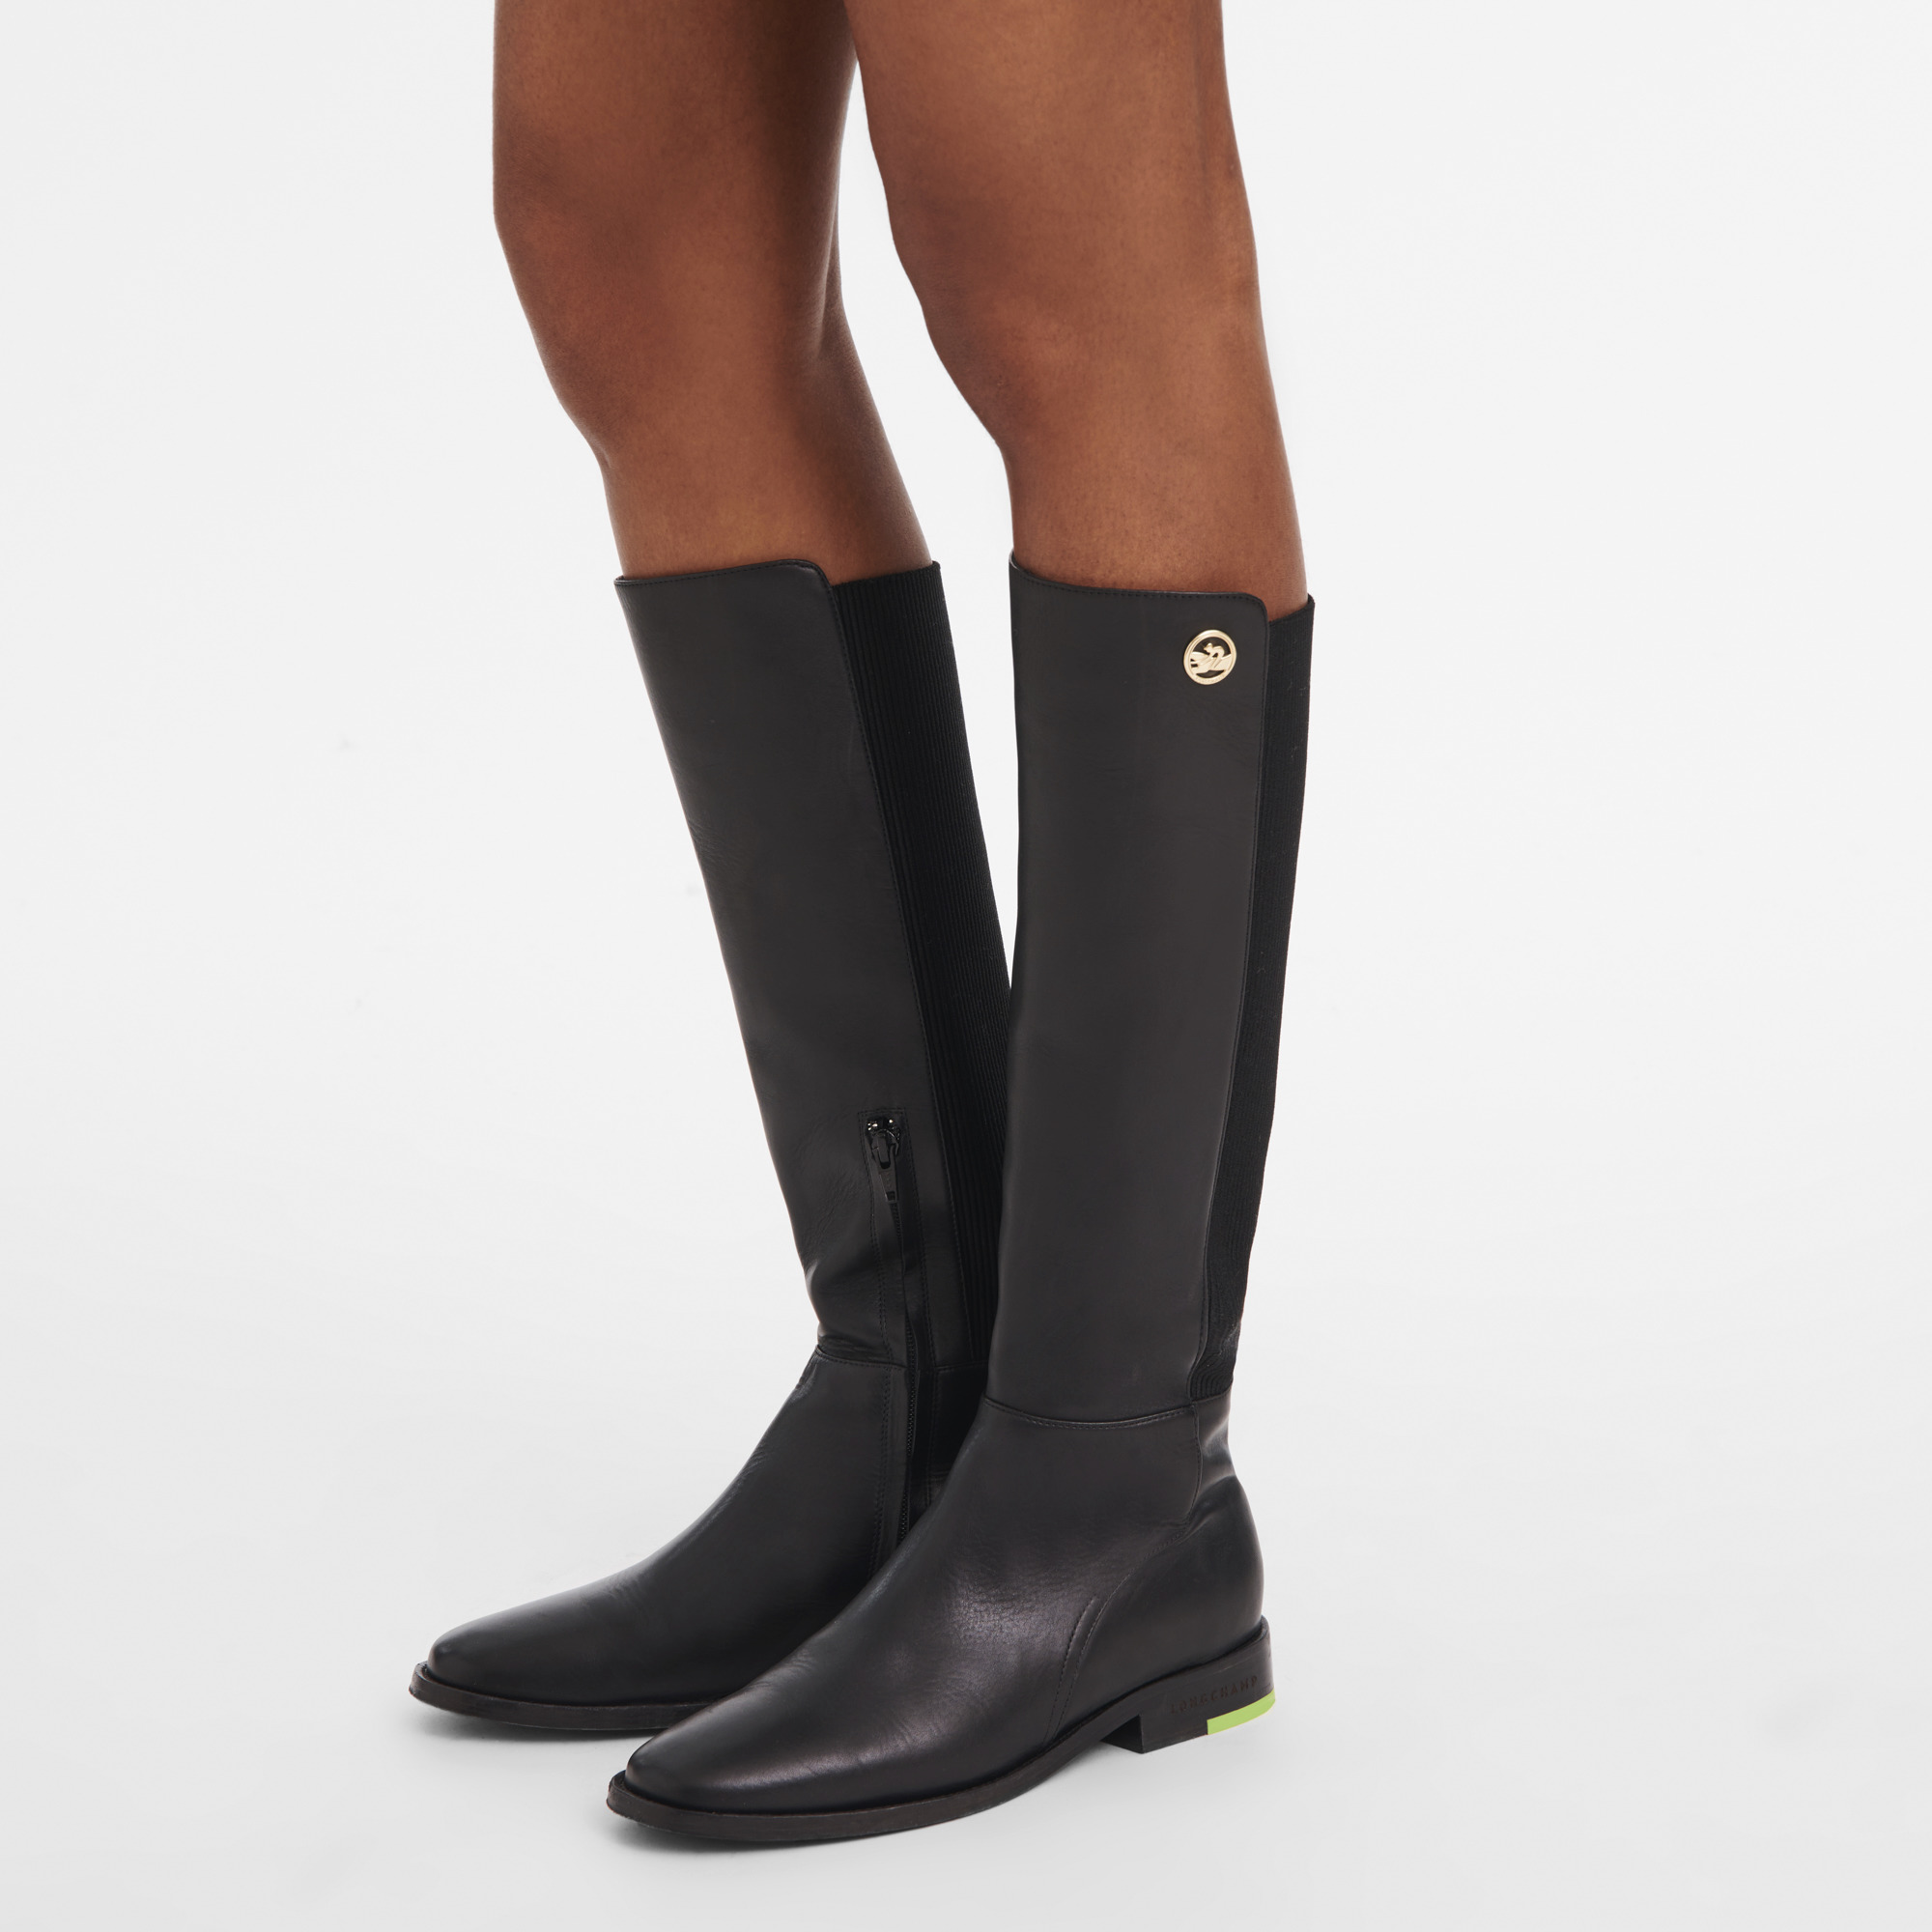 Box-trot Riding boots Black - Leather - 2